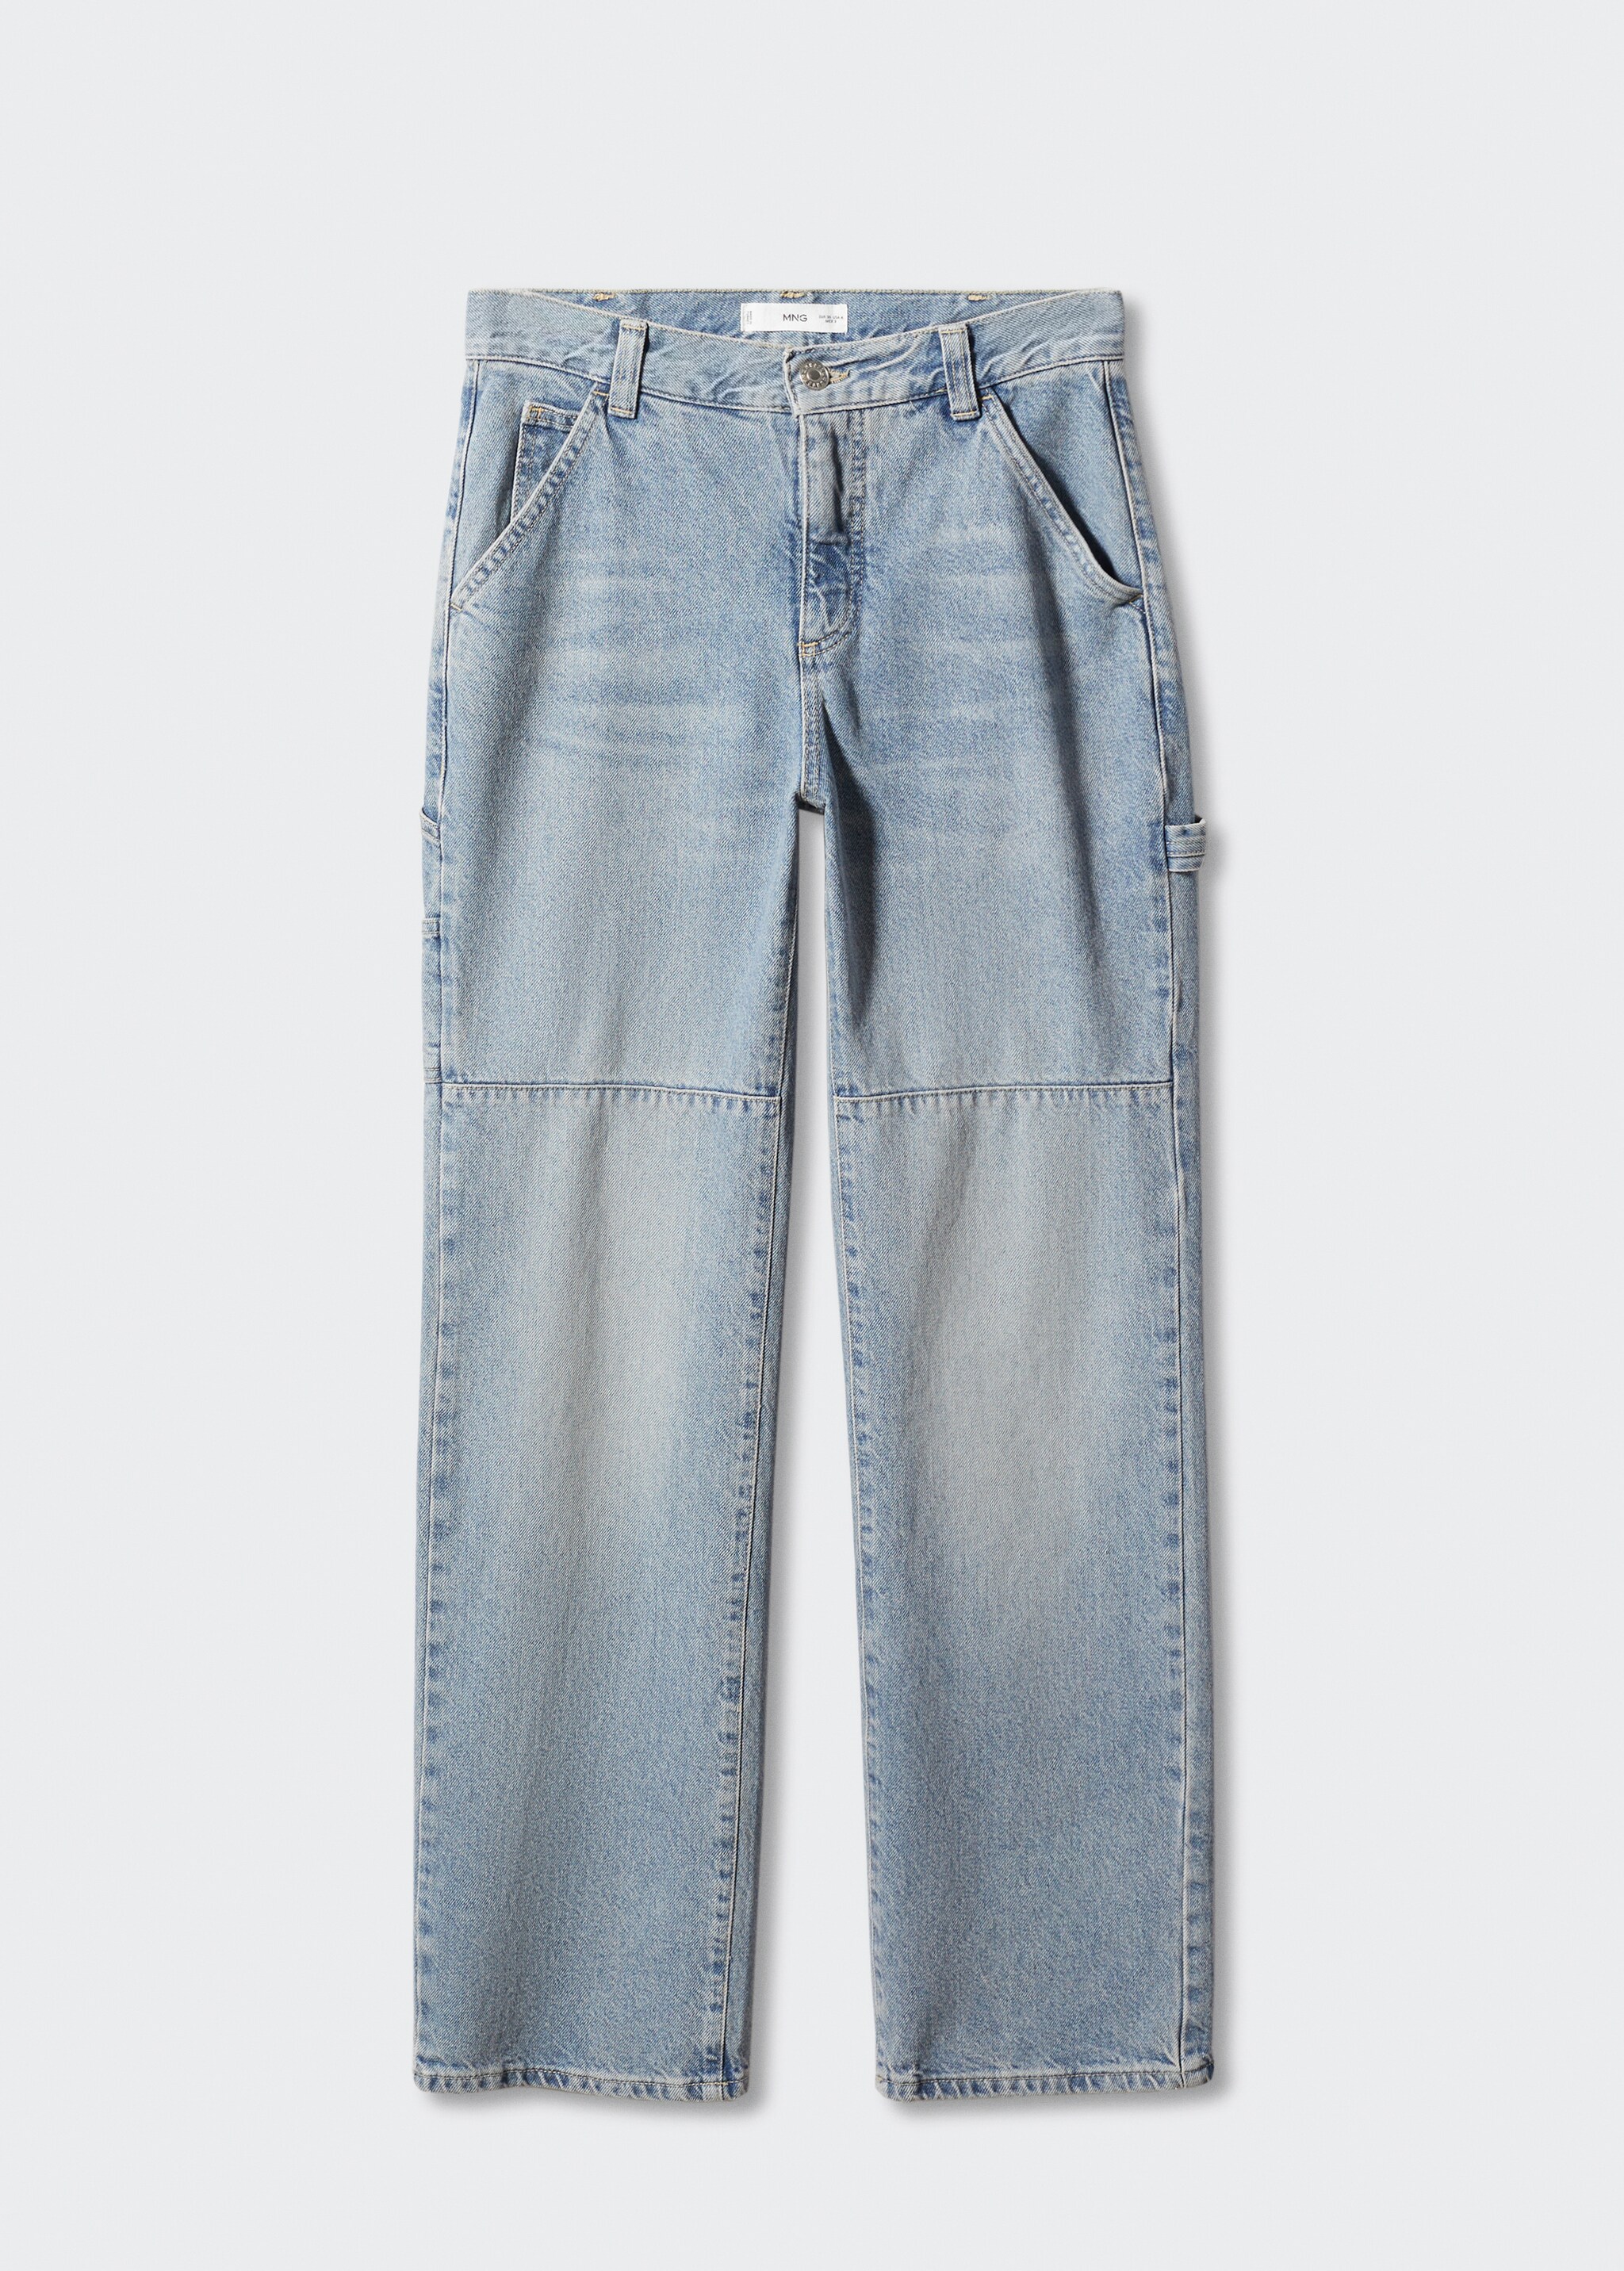 Carpenter cargo jeans - Article without model